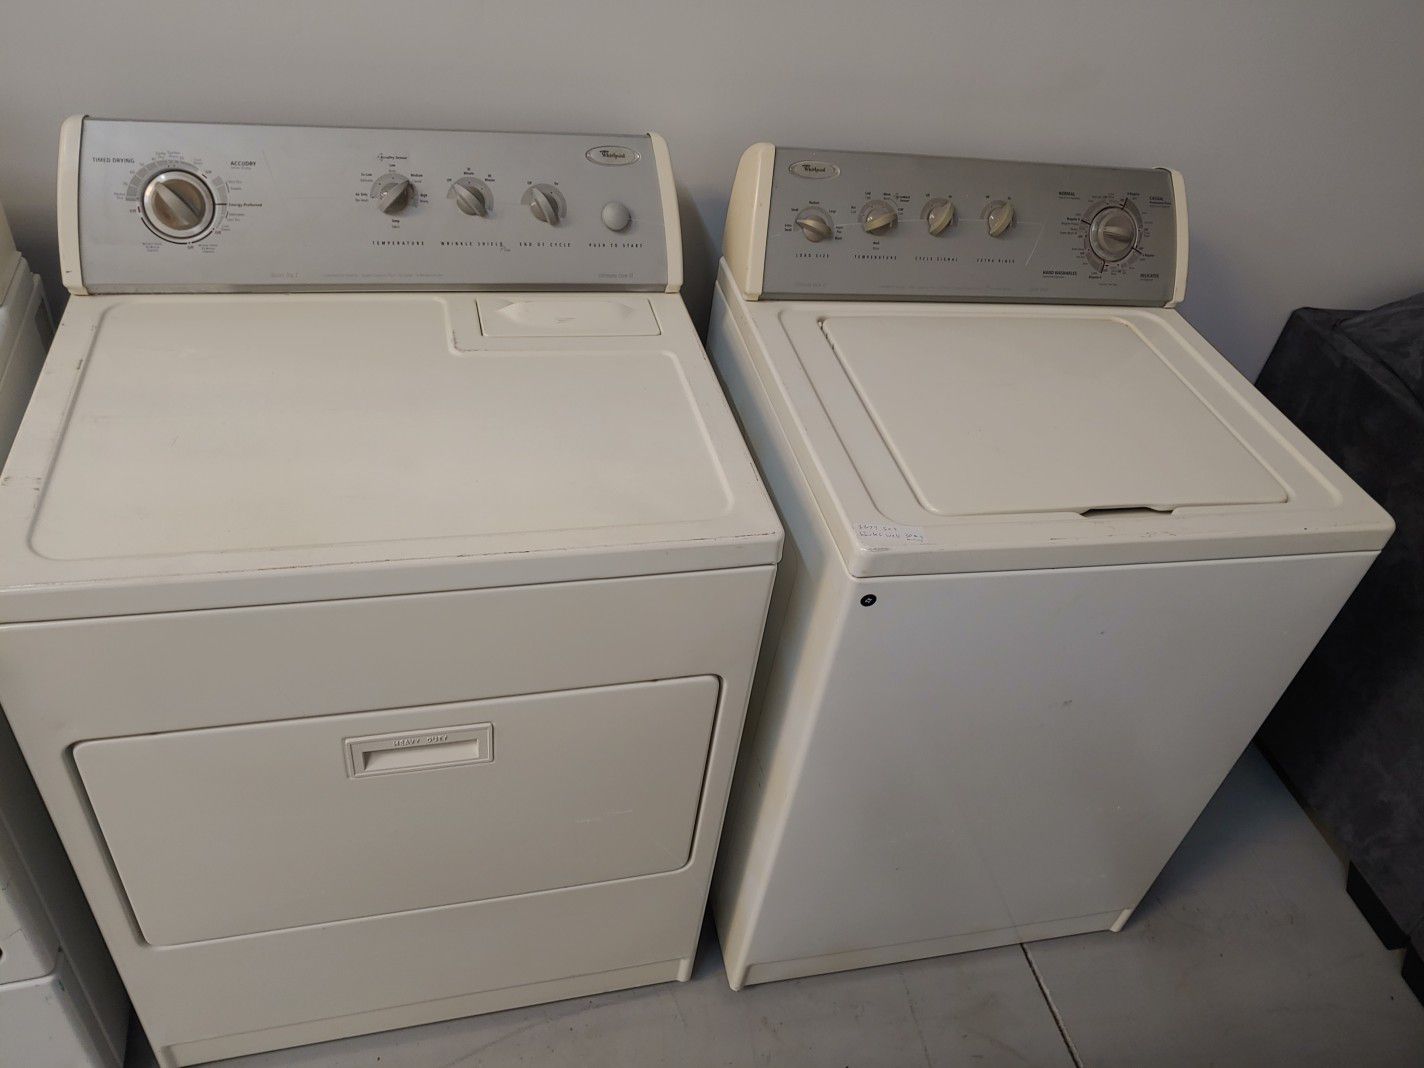 $379 WASHER AND DRYER PREVIOUSLY OWNED